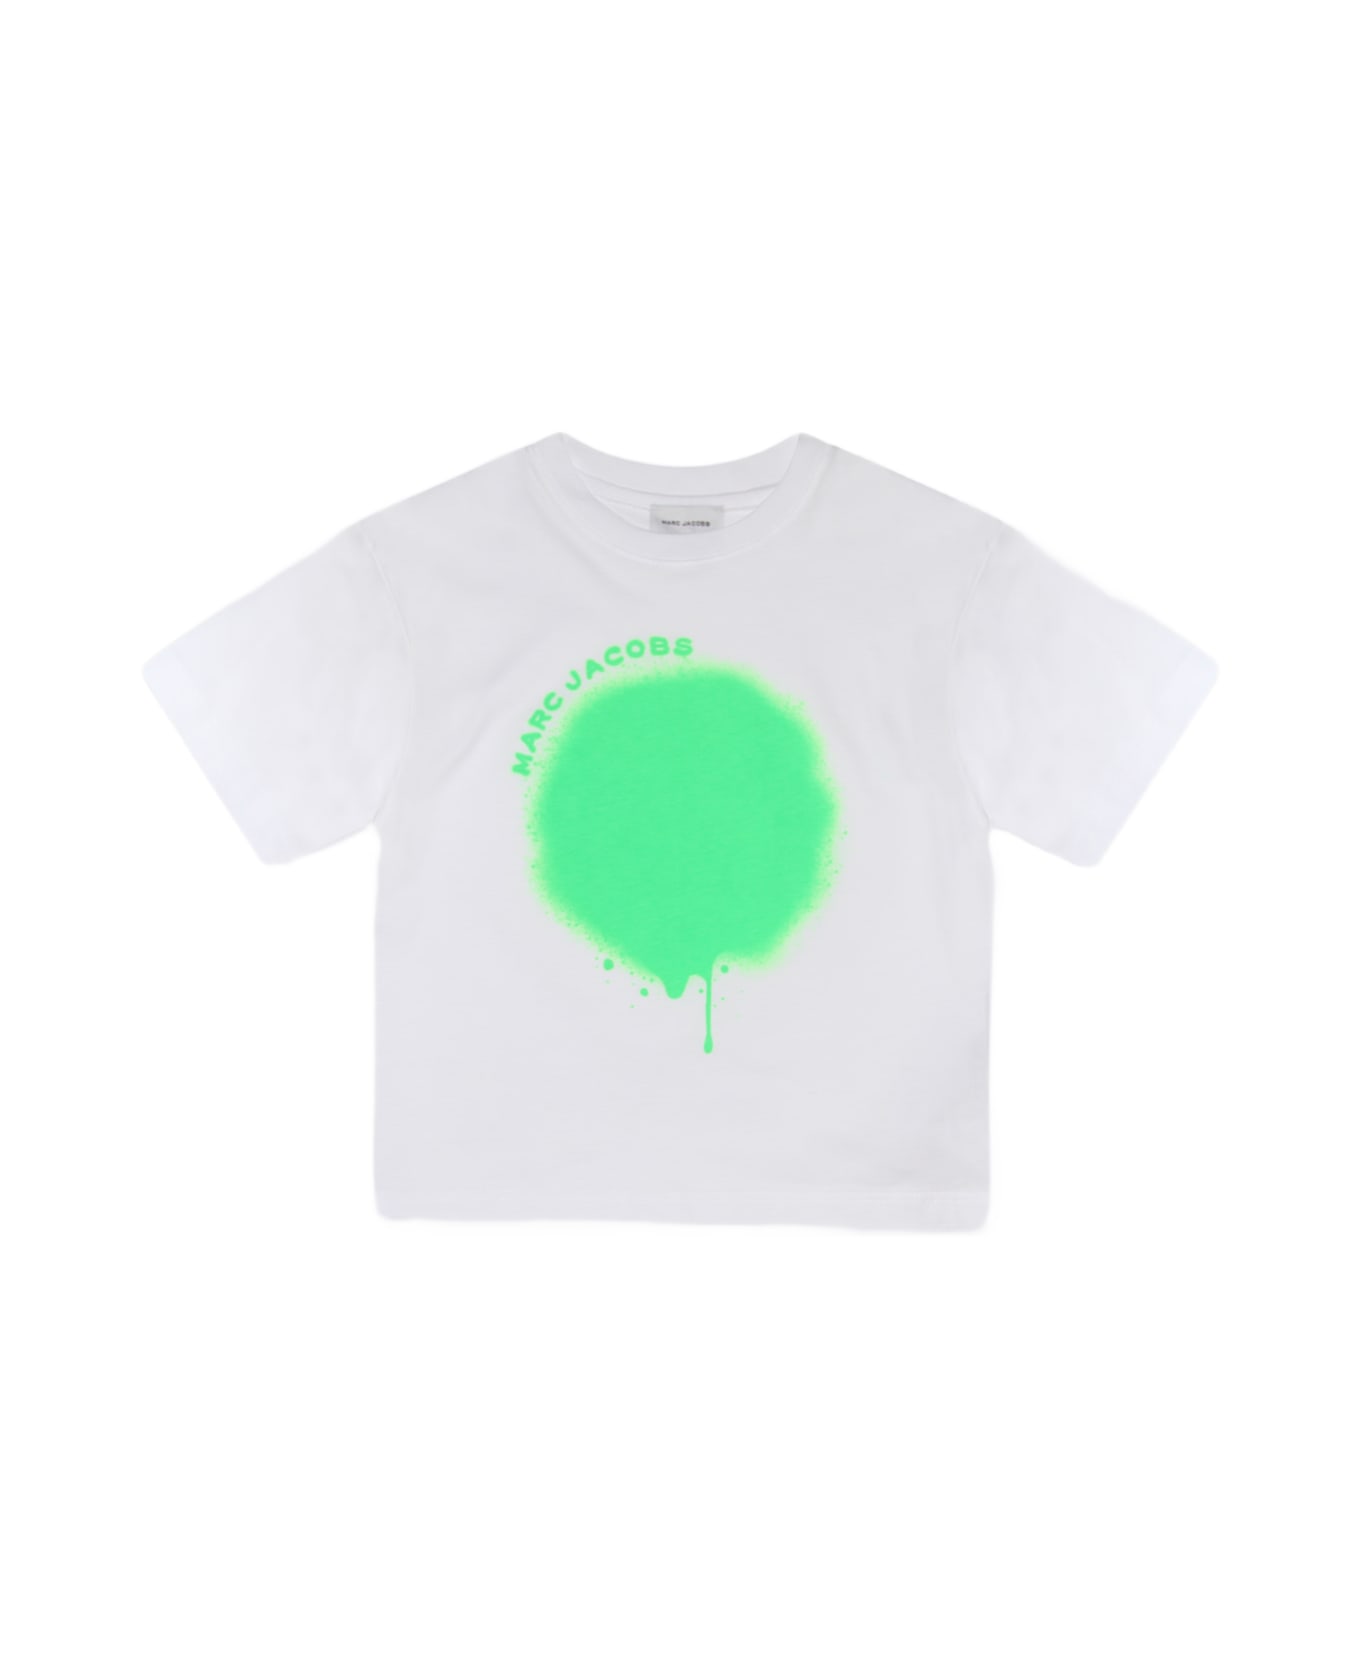 Marc Jacobs White And Green Cotton T-shirt - Green